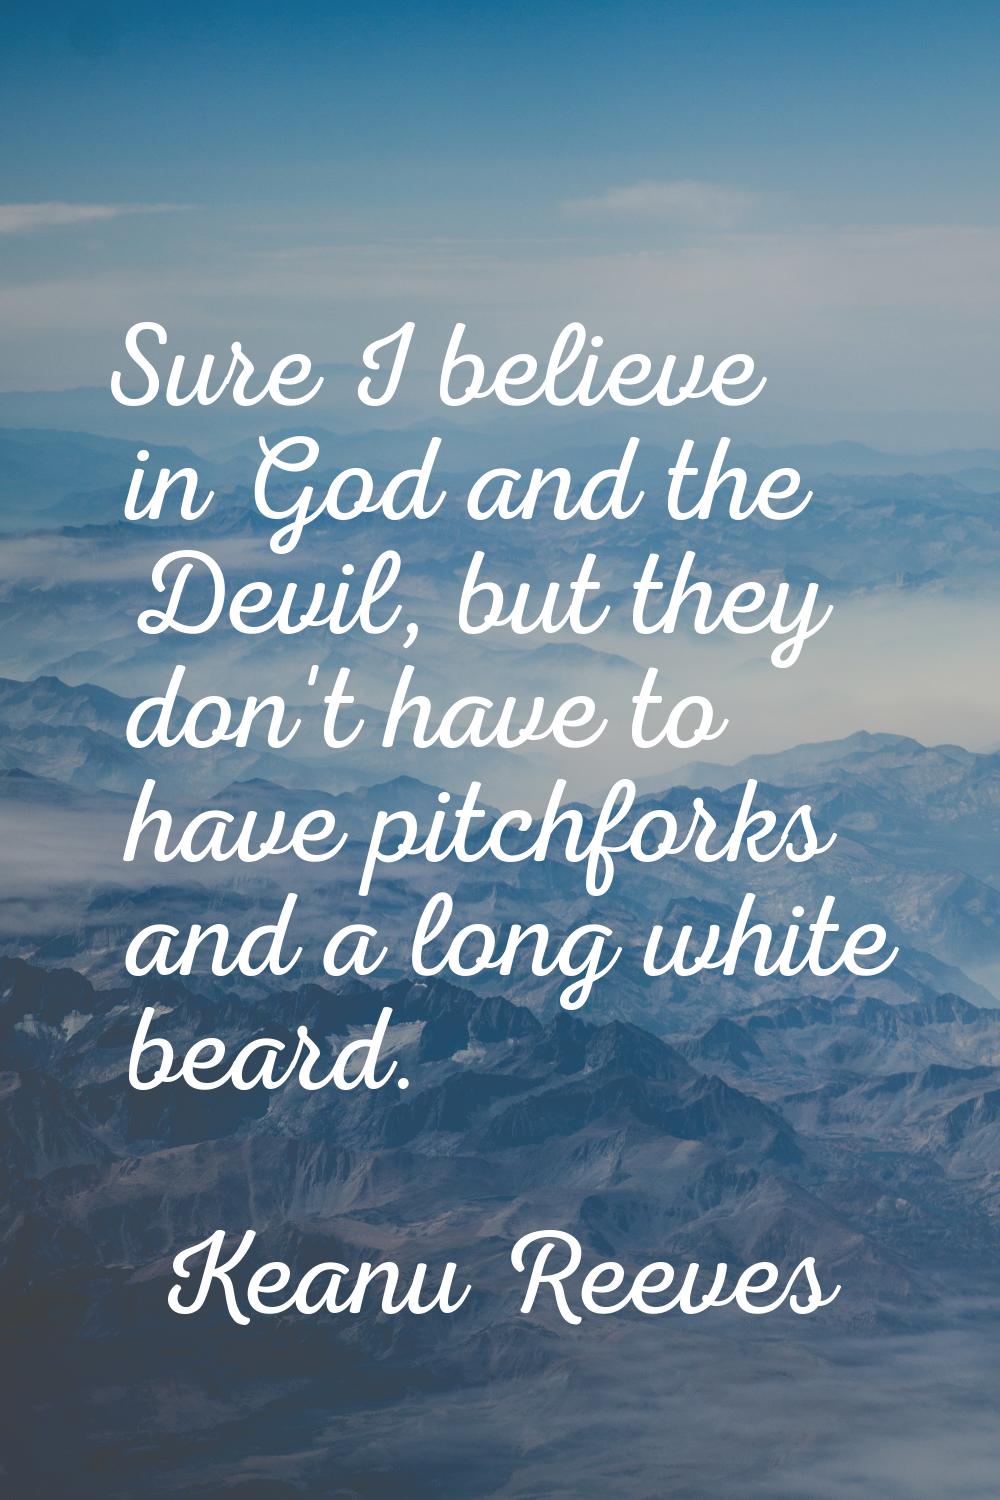 Sure I believe in God and the Devil, but they don't have to have pitchforks and a long white beard.